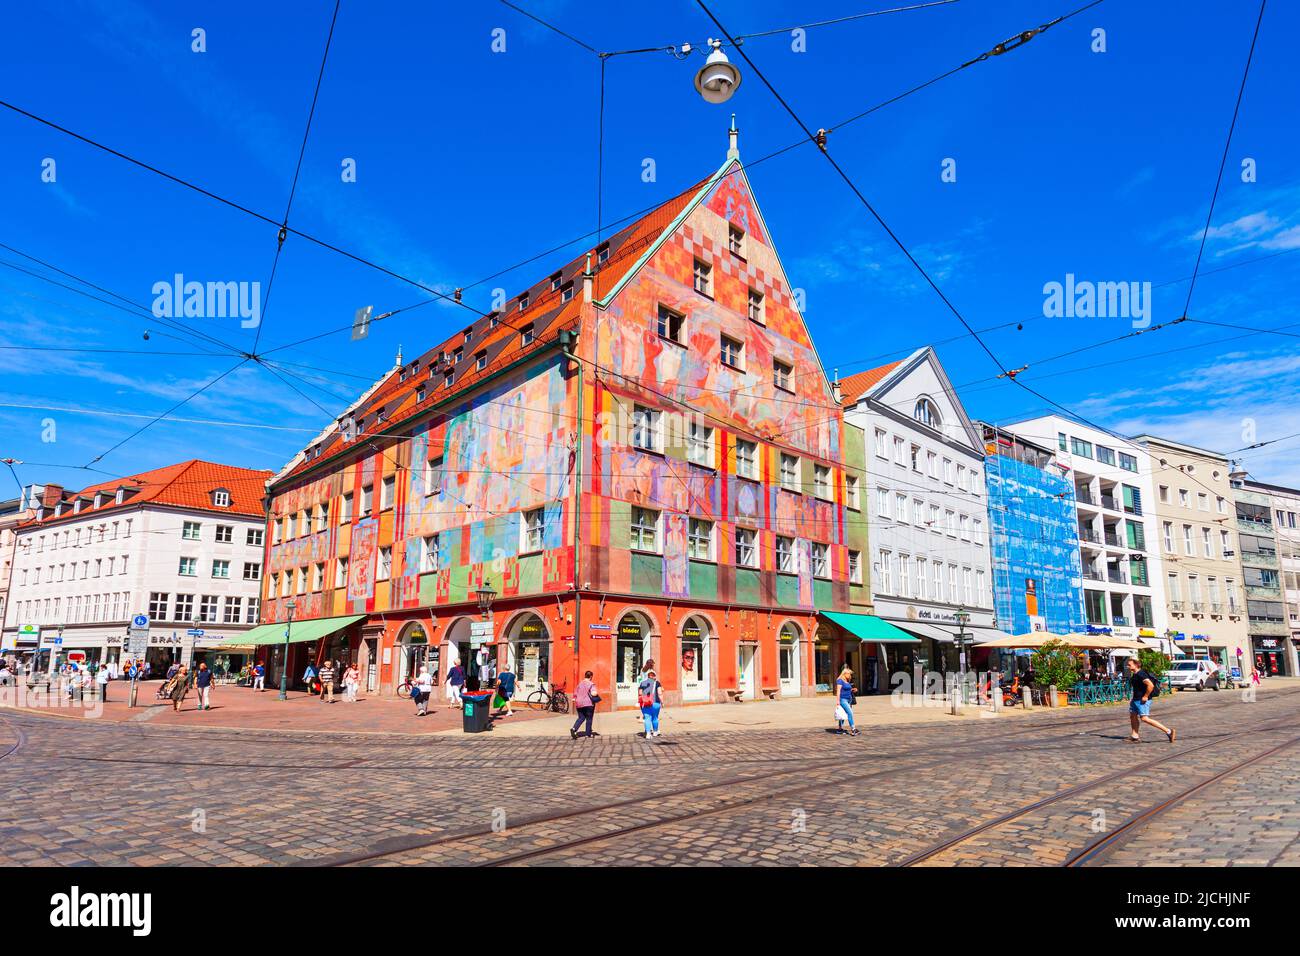 Augsburg, Germany - July 06, 2021: The Weberhaus is the former guild house of the weavers in Augsburg. Weberhaus is located in the city center at Mori Stock Photo